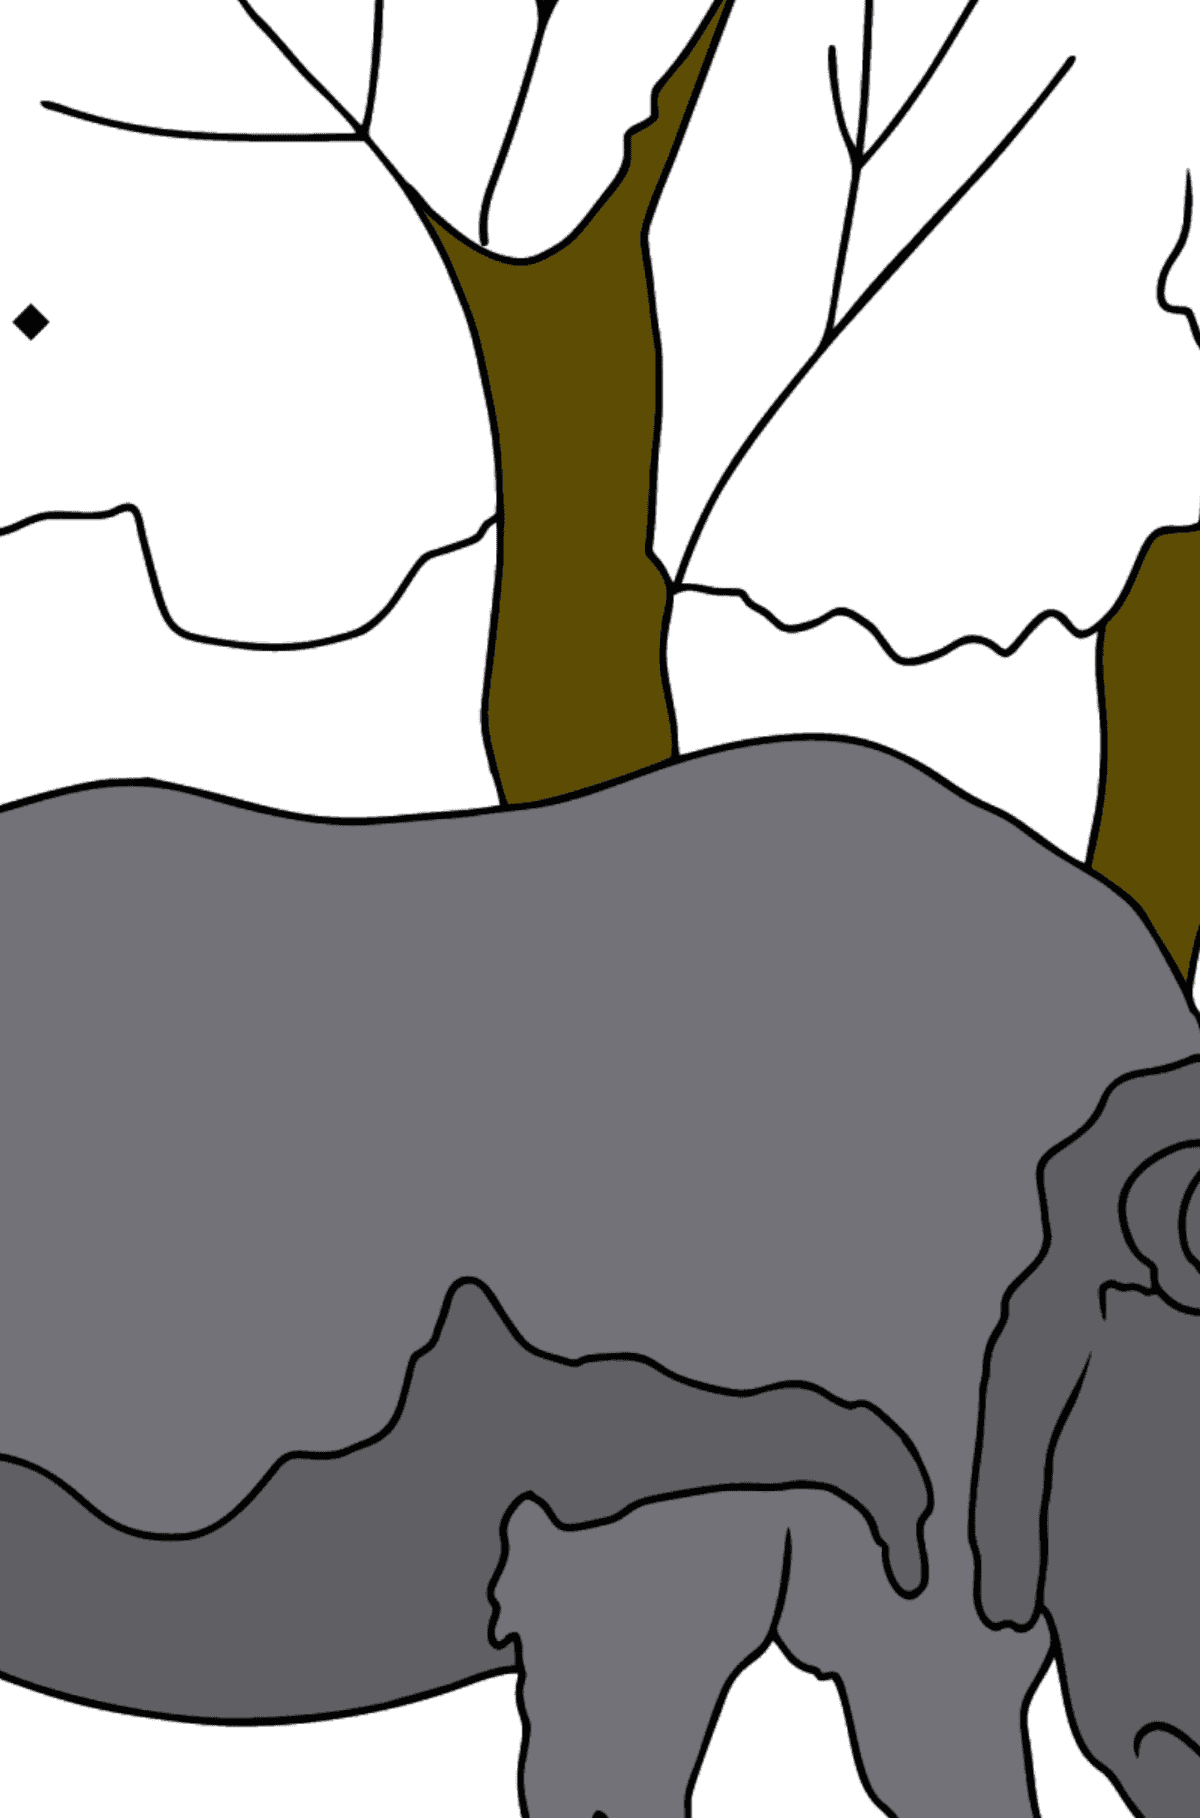 Coloring Page - A Rhino is Eating Grass - Coloring by Symbols for Kids